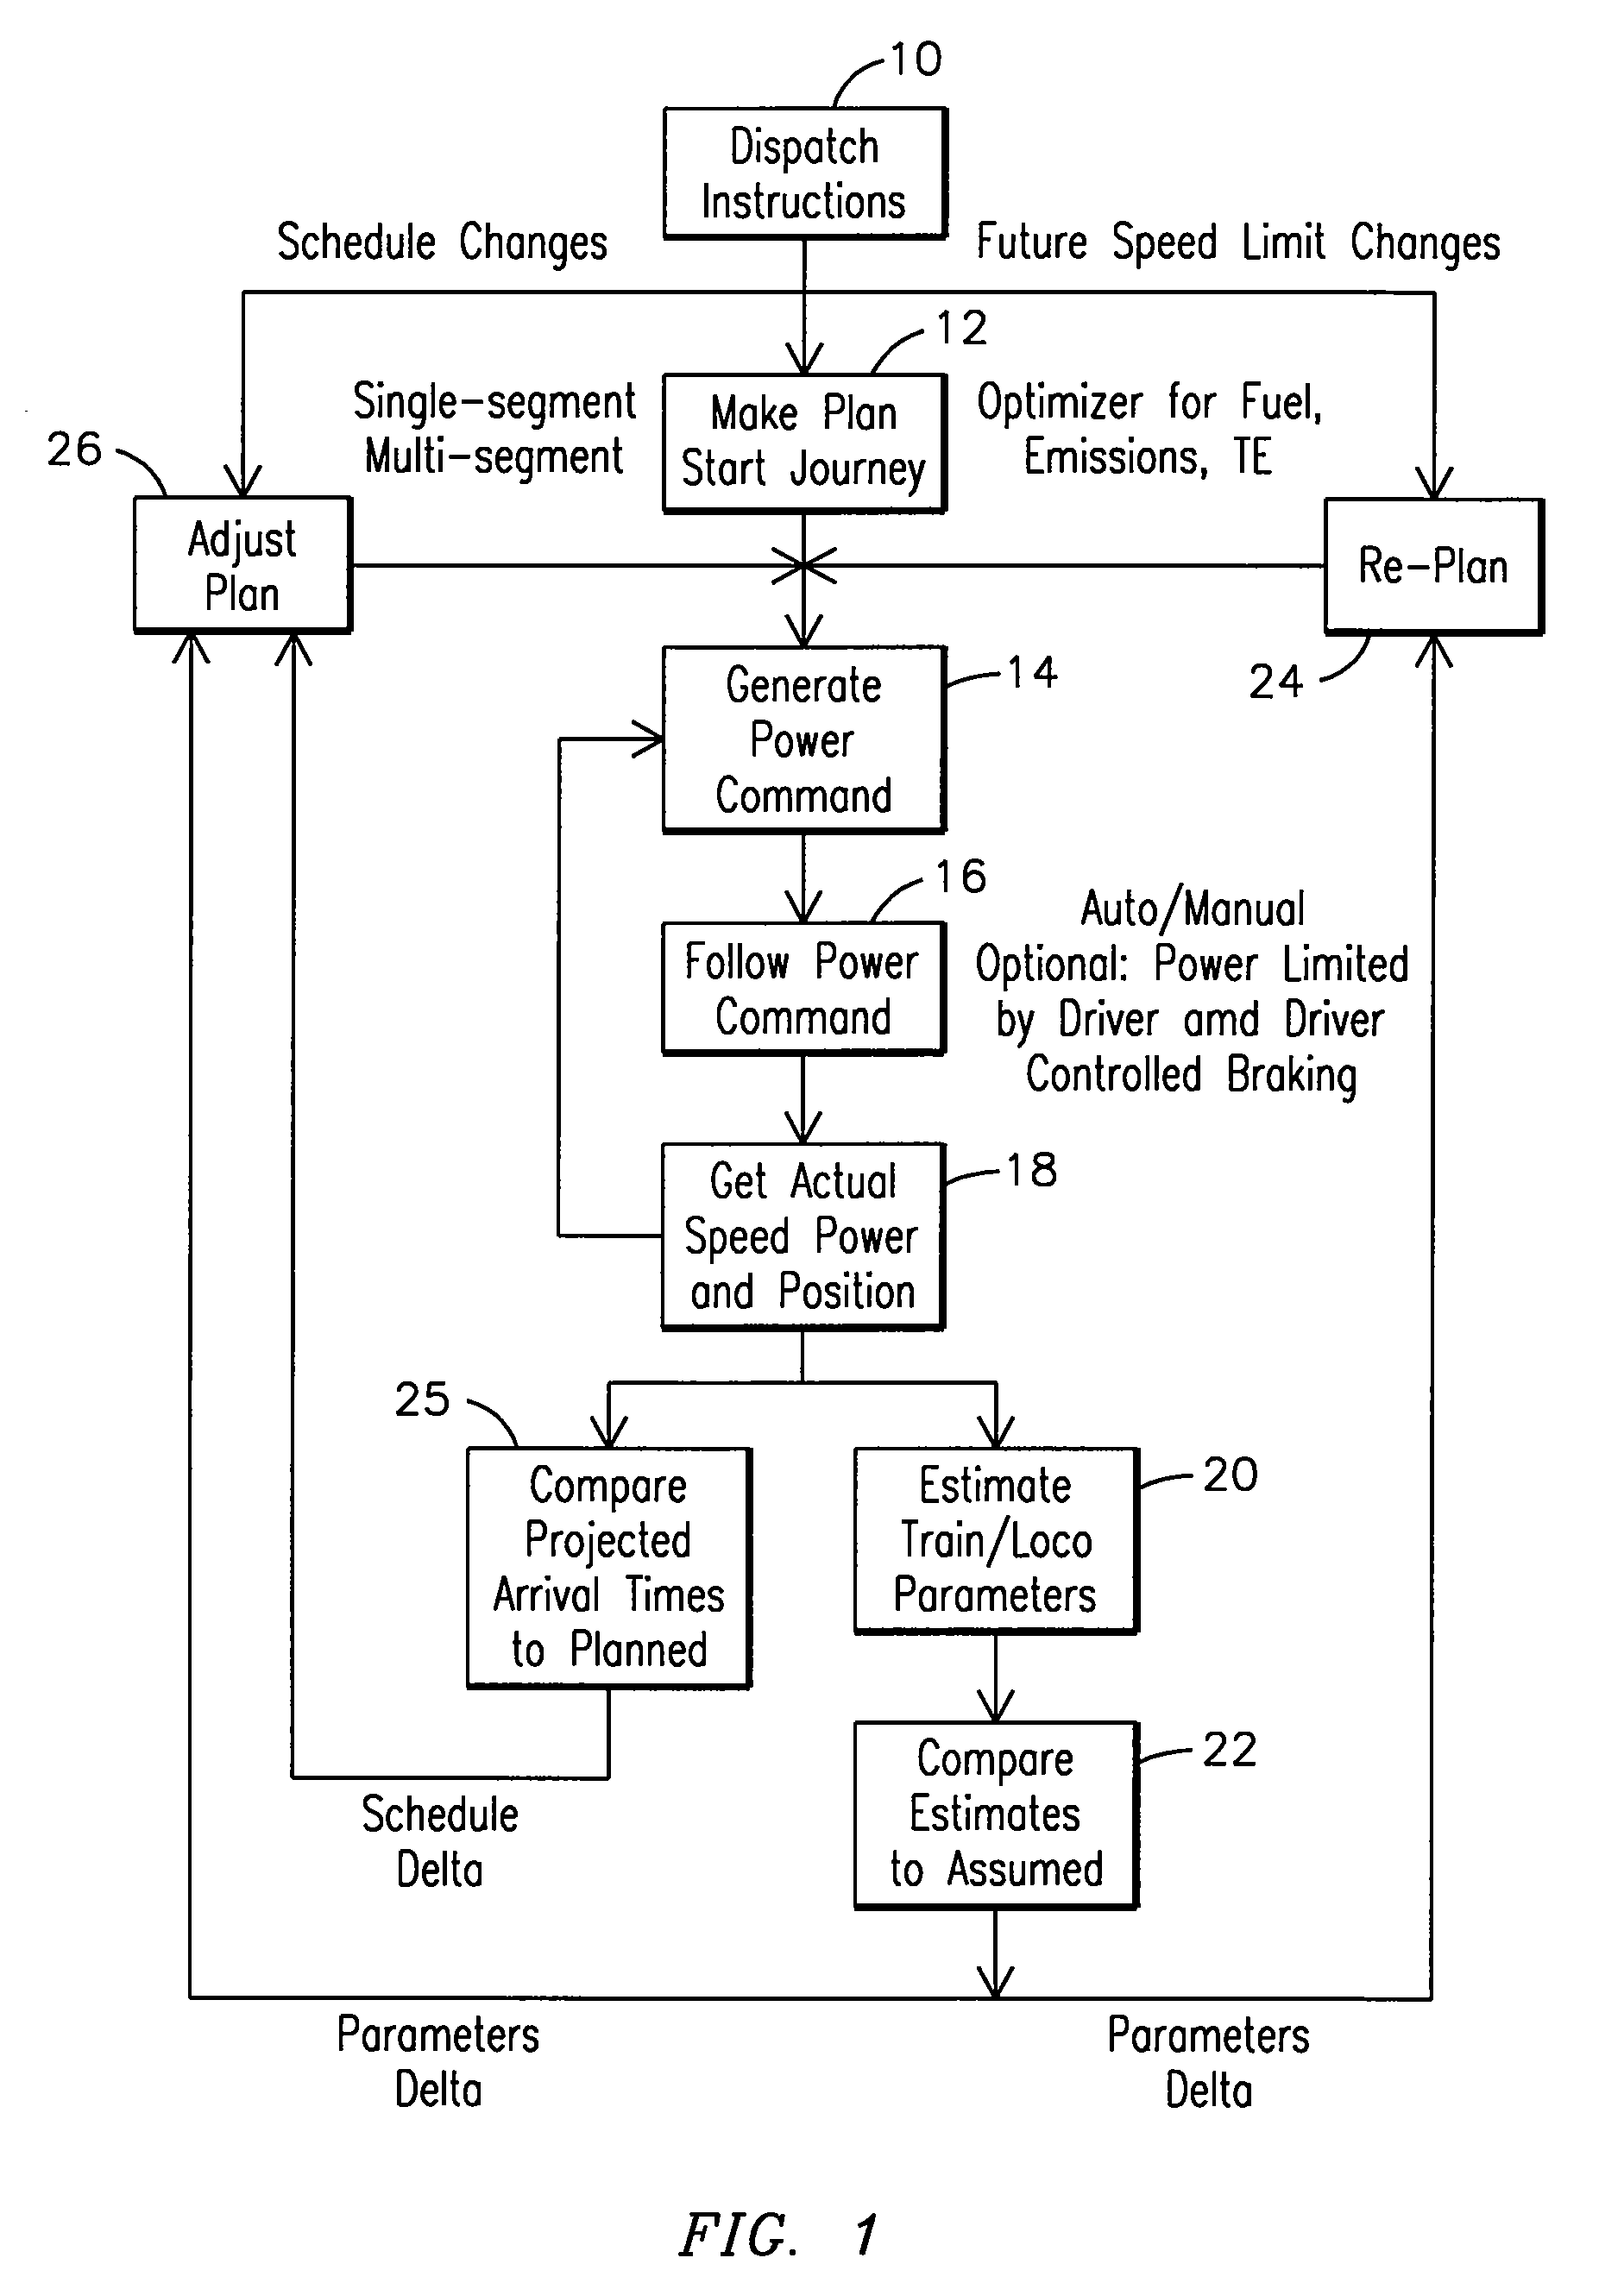 Method and computer software code for implementing a revised mission plan for a powered system